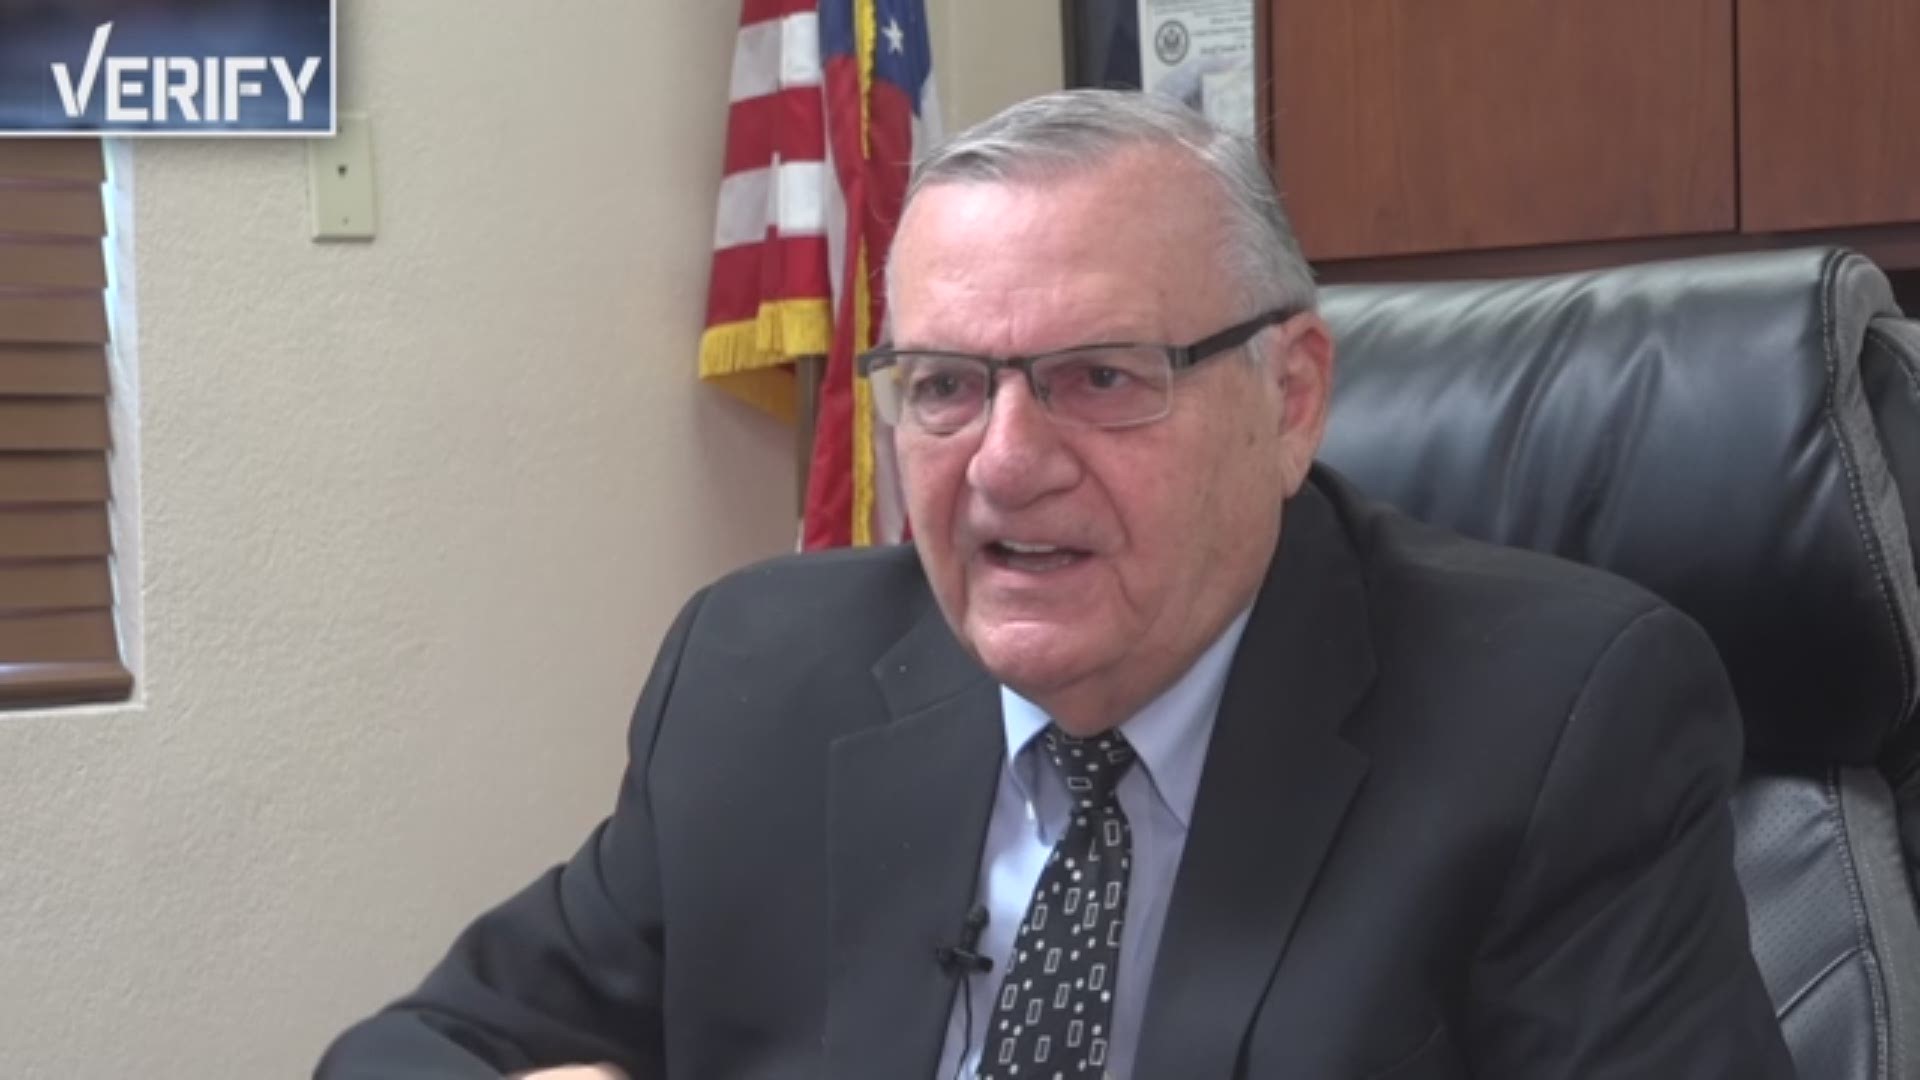 Former Maricopa County Sheriff Joe Arpaio is suing several media publications for defamation while hinting at another potential run for office.